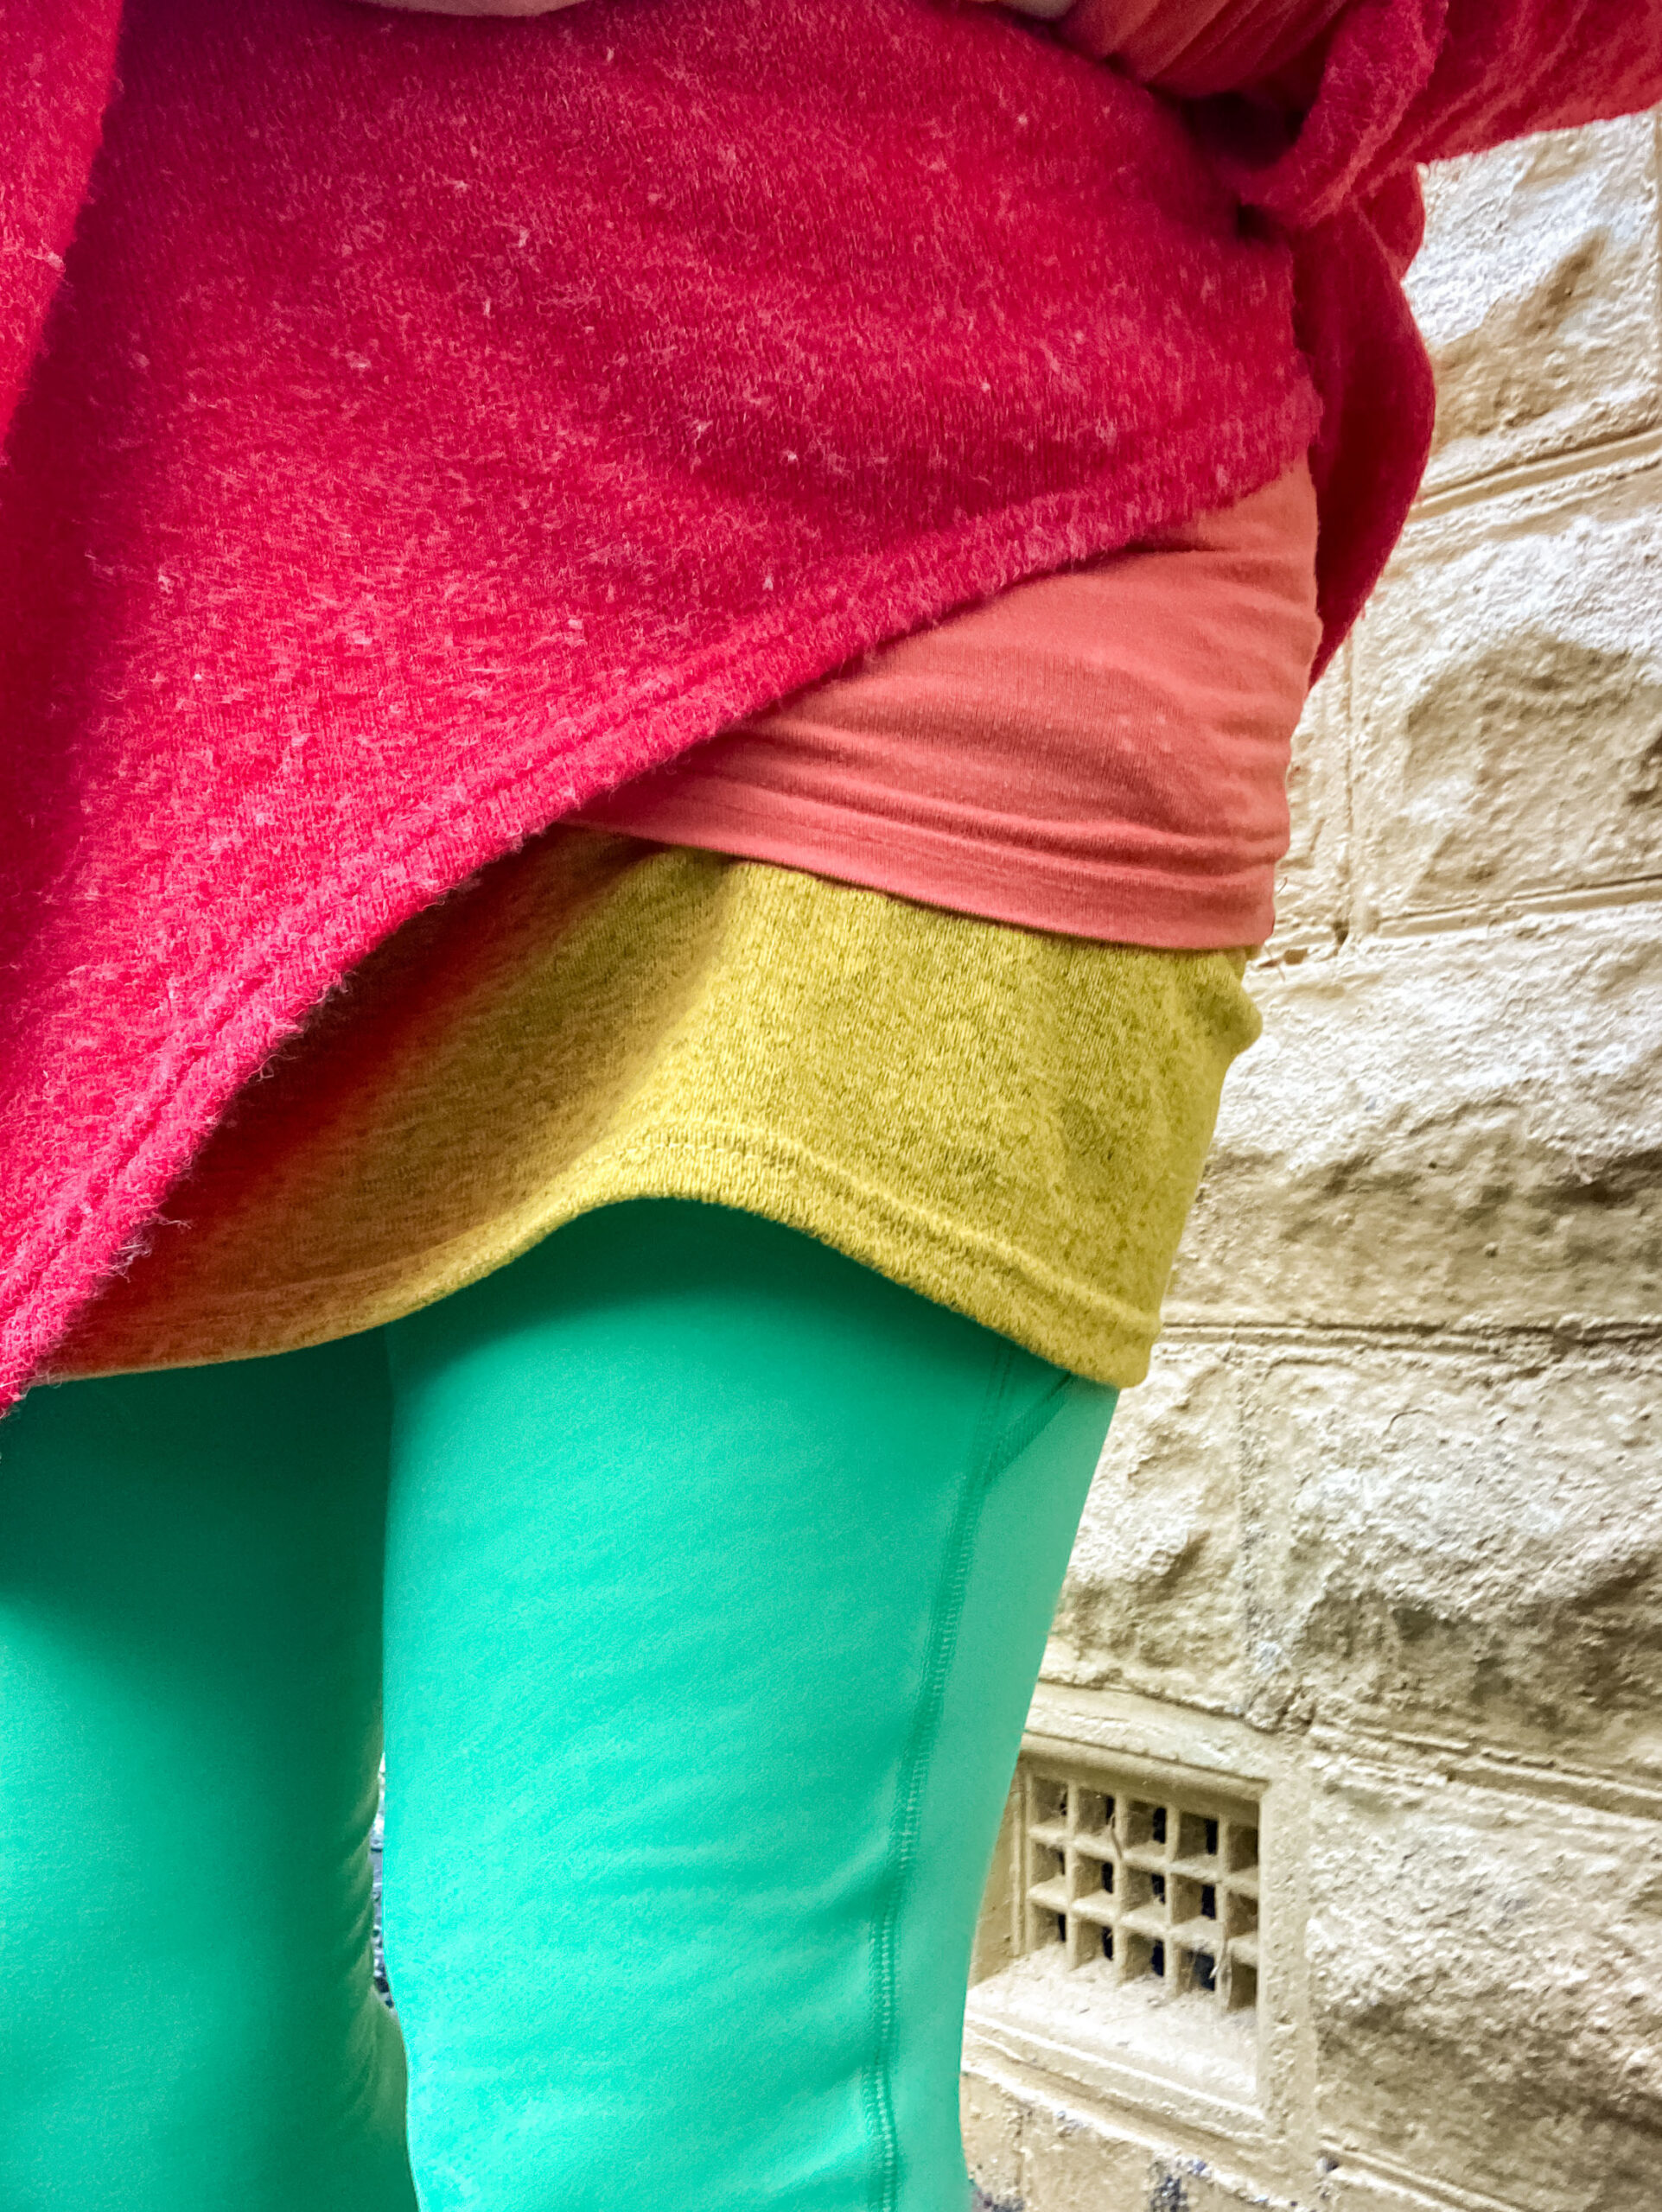 A close up of a person wearing green leggings, yellow skirt, orange top and a red jumper. The image doesn't show their face, just their upper leg and abdomen